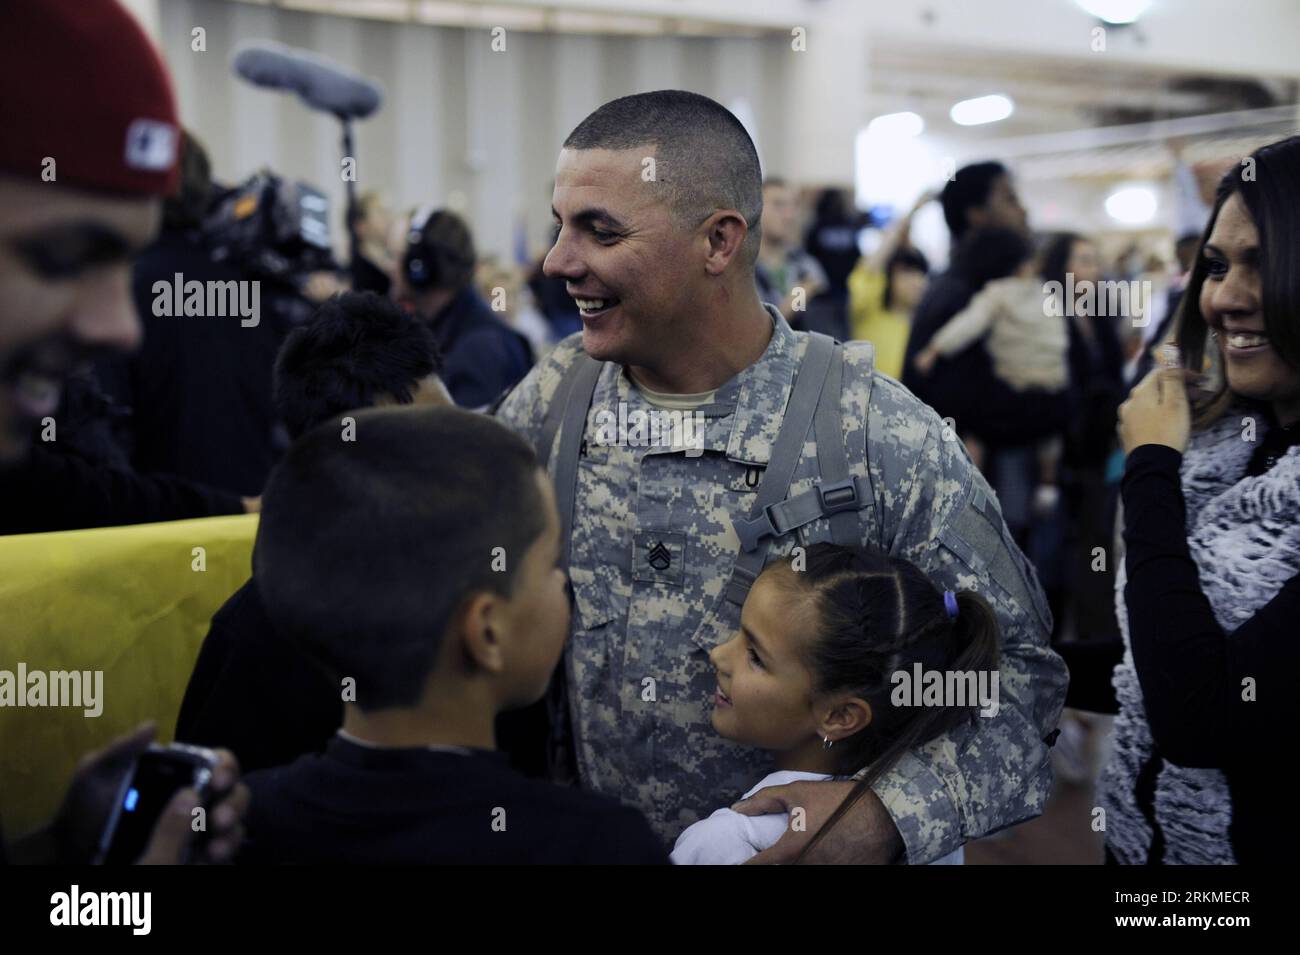 Bildnummer: 56693226  Datum: 12.12.2011  Copyright: imago/Xinhua (111213) -- EL PASO (TEXAS), Dec. 13, 2011 (Xinhua) -- A soldier from 4th Brigade, 1st Armored Division, US Army, hugs his family during a homecoming ceremony at Fort Bliss in El Paso of Texas, the United States, Dec. 12, 2011. Some 270 soldiers of 4th Brigade returned from Iraq and reunited with their family on Monday. U.S. military forces are to pull out completely from Iraq by the end of 2011, according to a security pact, named Status of Forces Agreement (SOFA), signed late in 2008 between Baghdad and Washington. (Xinhua/Zhan Stock Photo